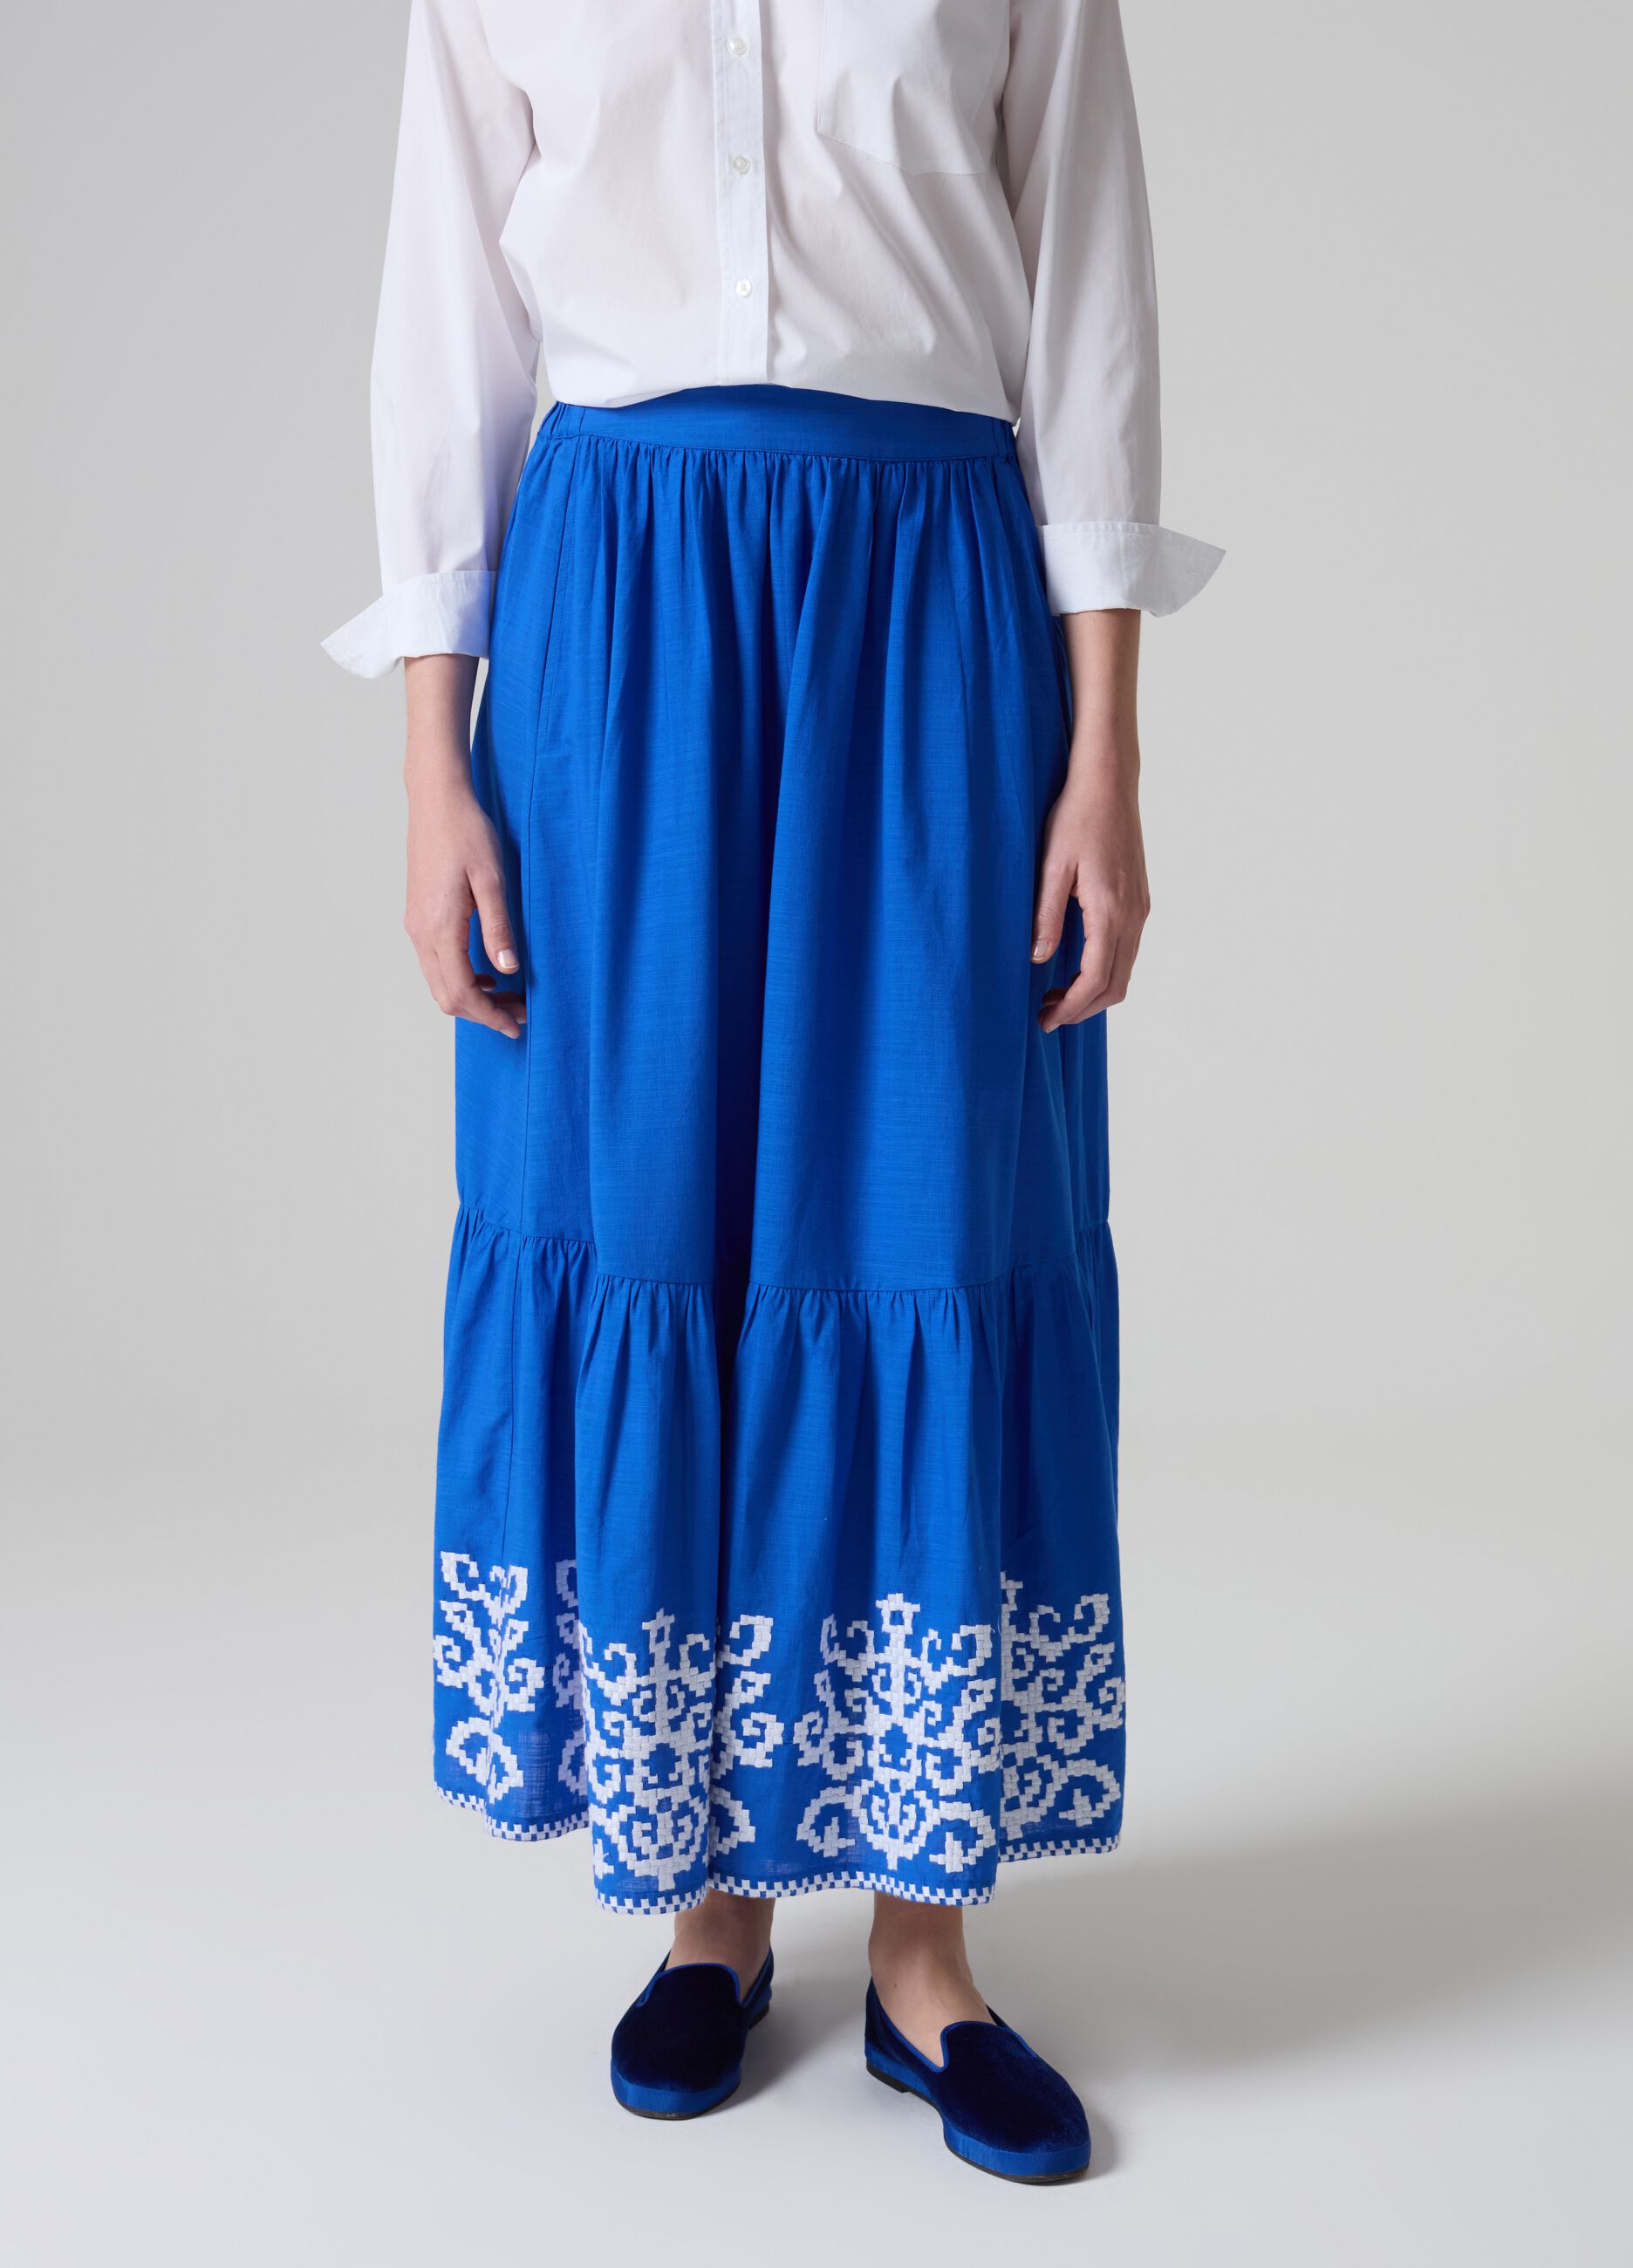 Long skirt with ethnic embroidery flounce